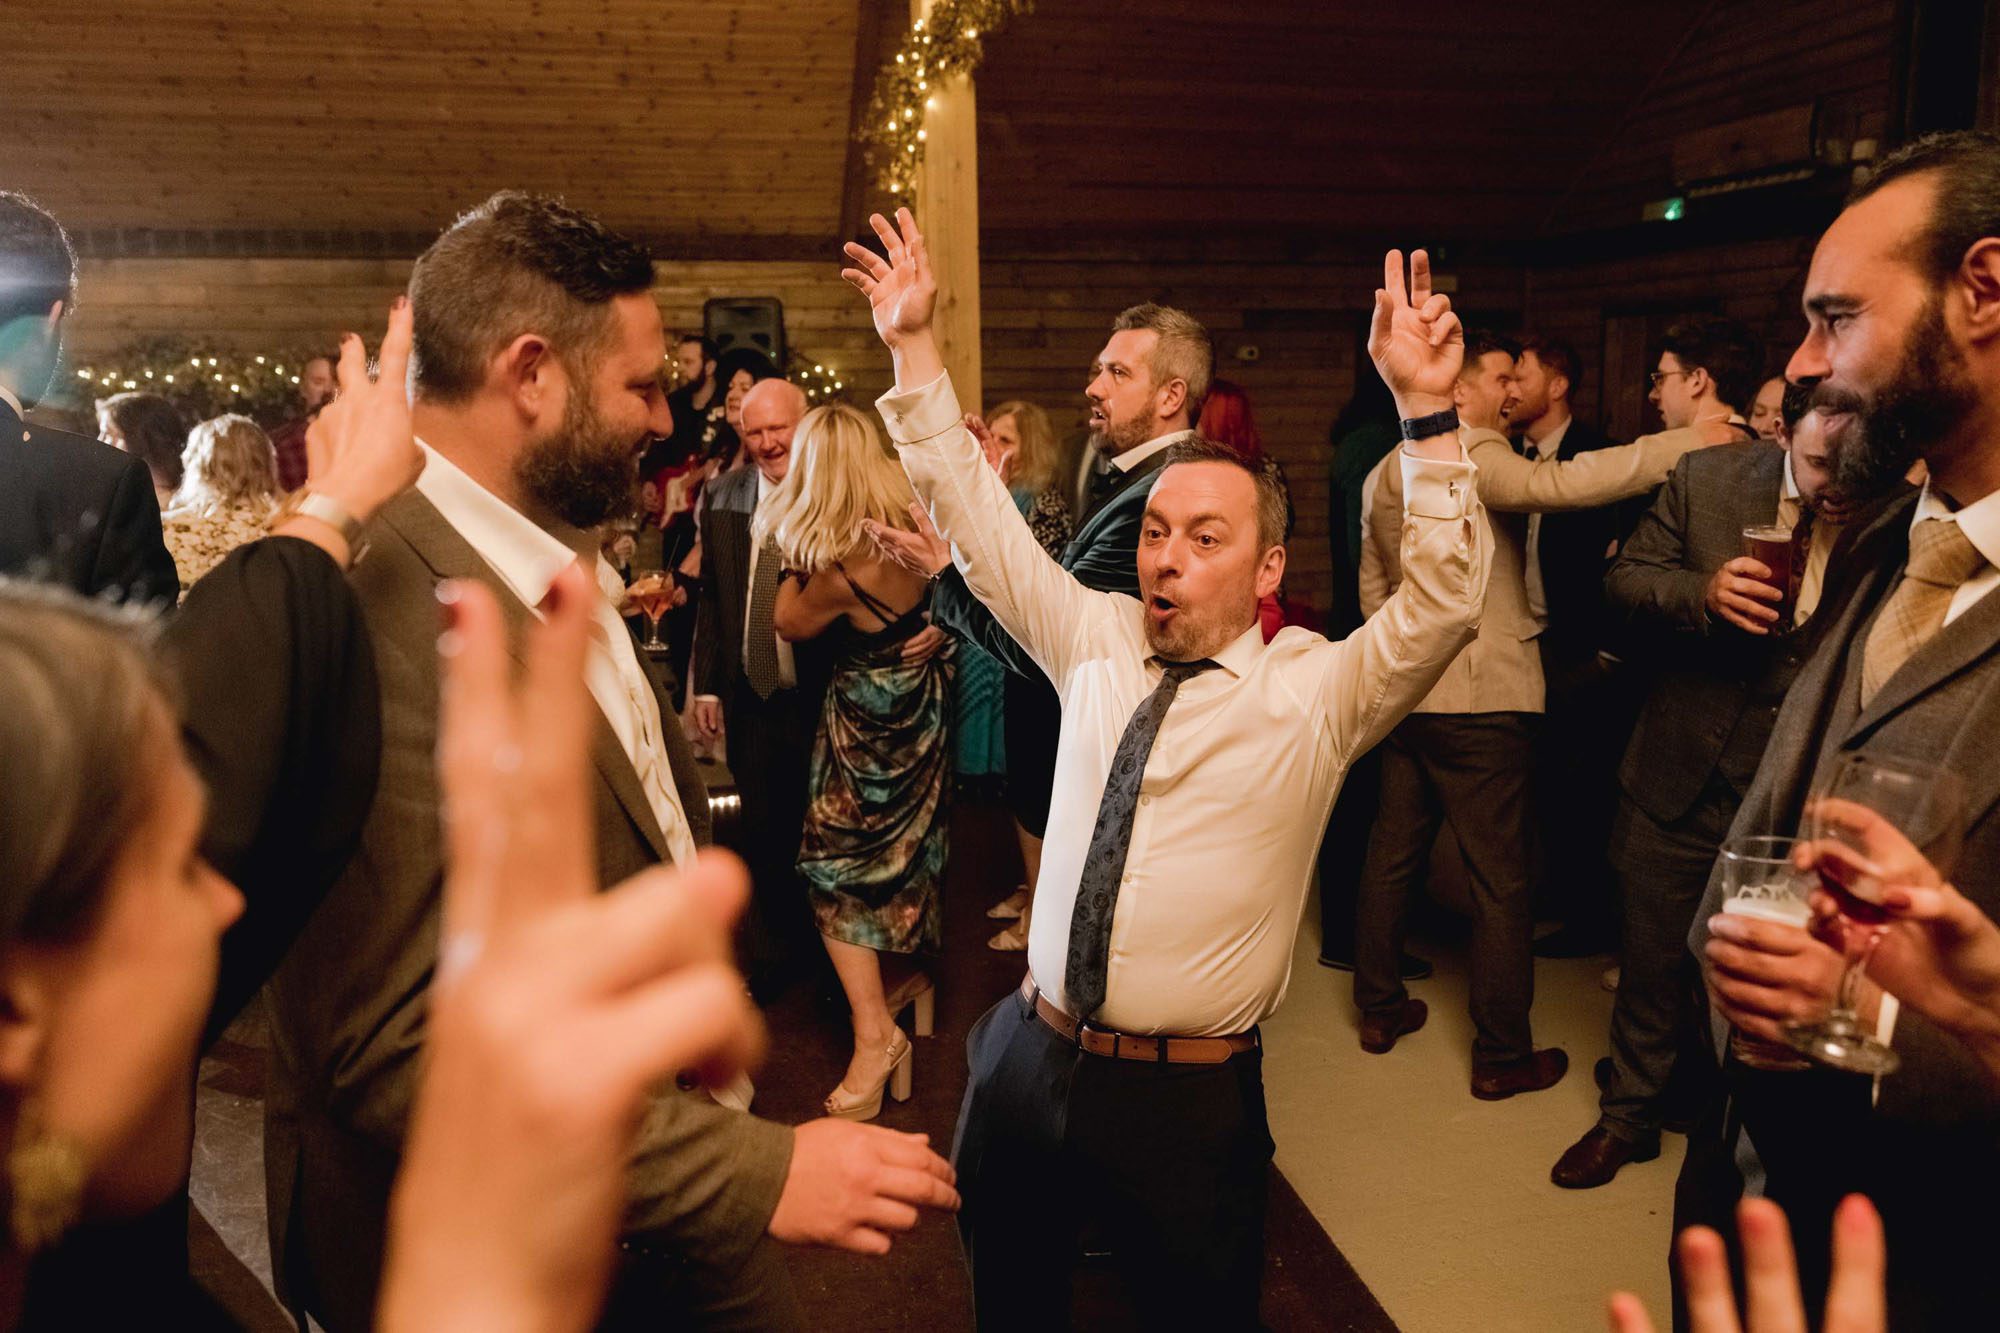 A guest dancing on the dance floor at a wedding.